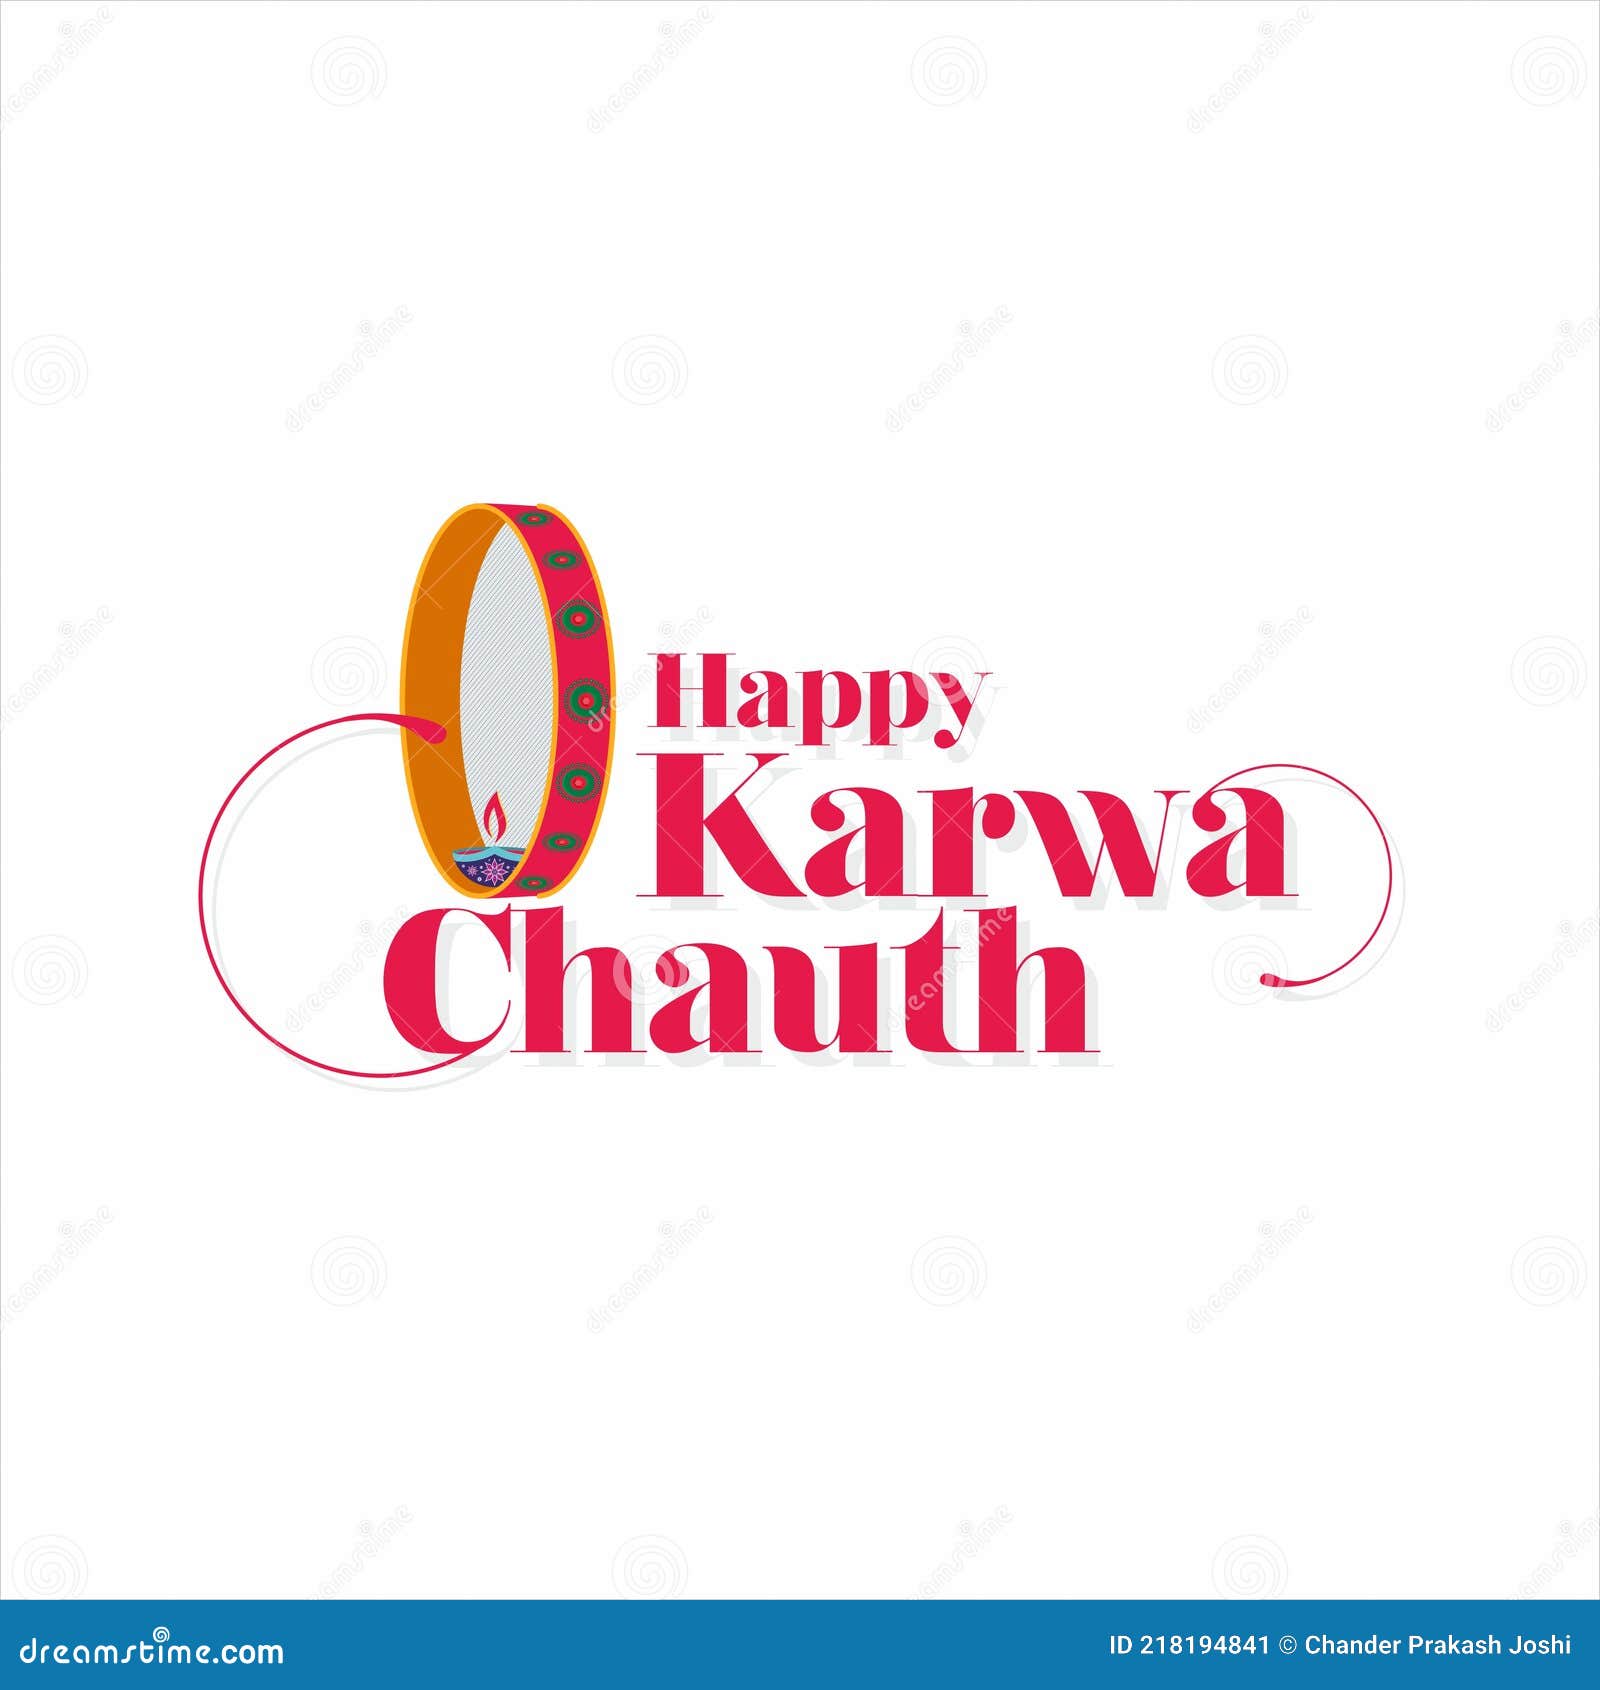 Karwa Chauth Images | Photos, videos, logos, illustrations and branding on  Behance